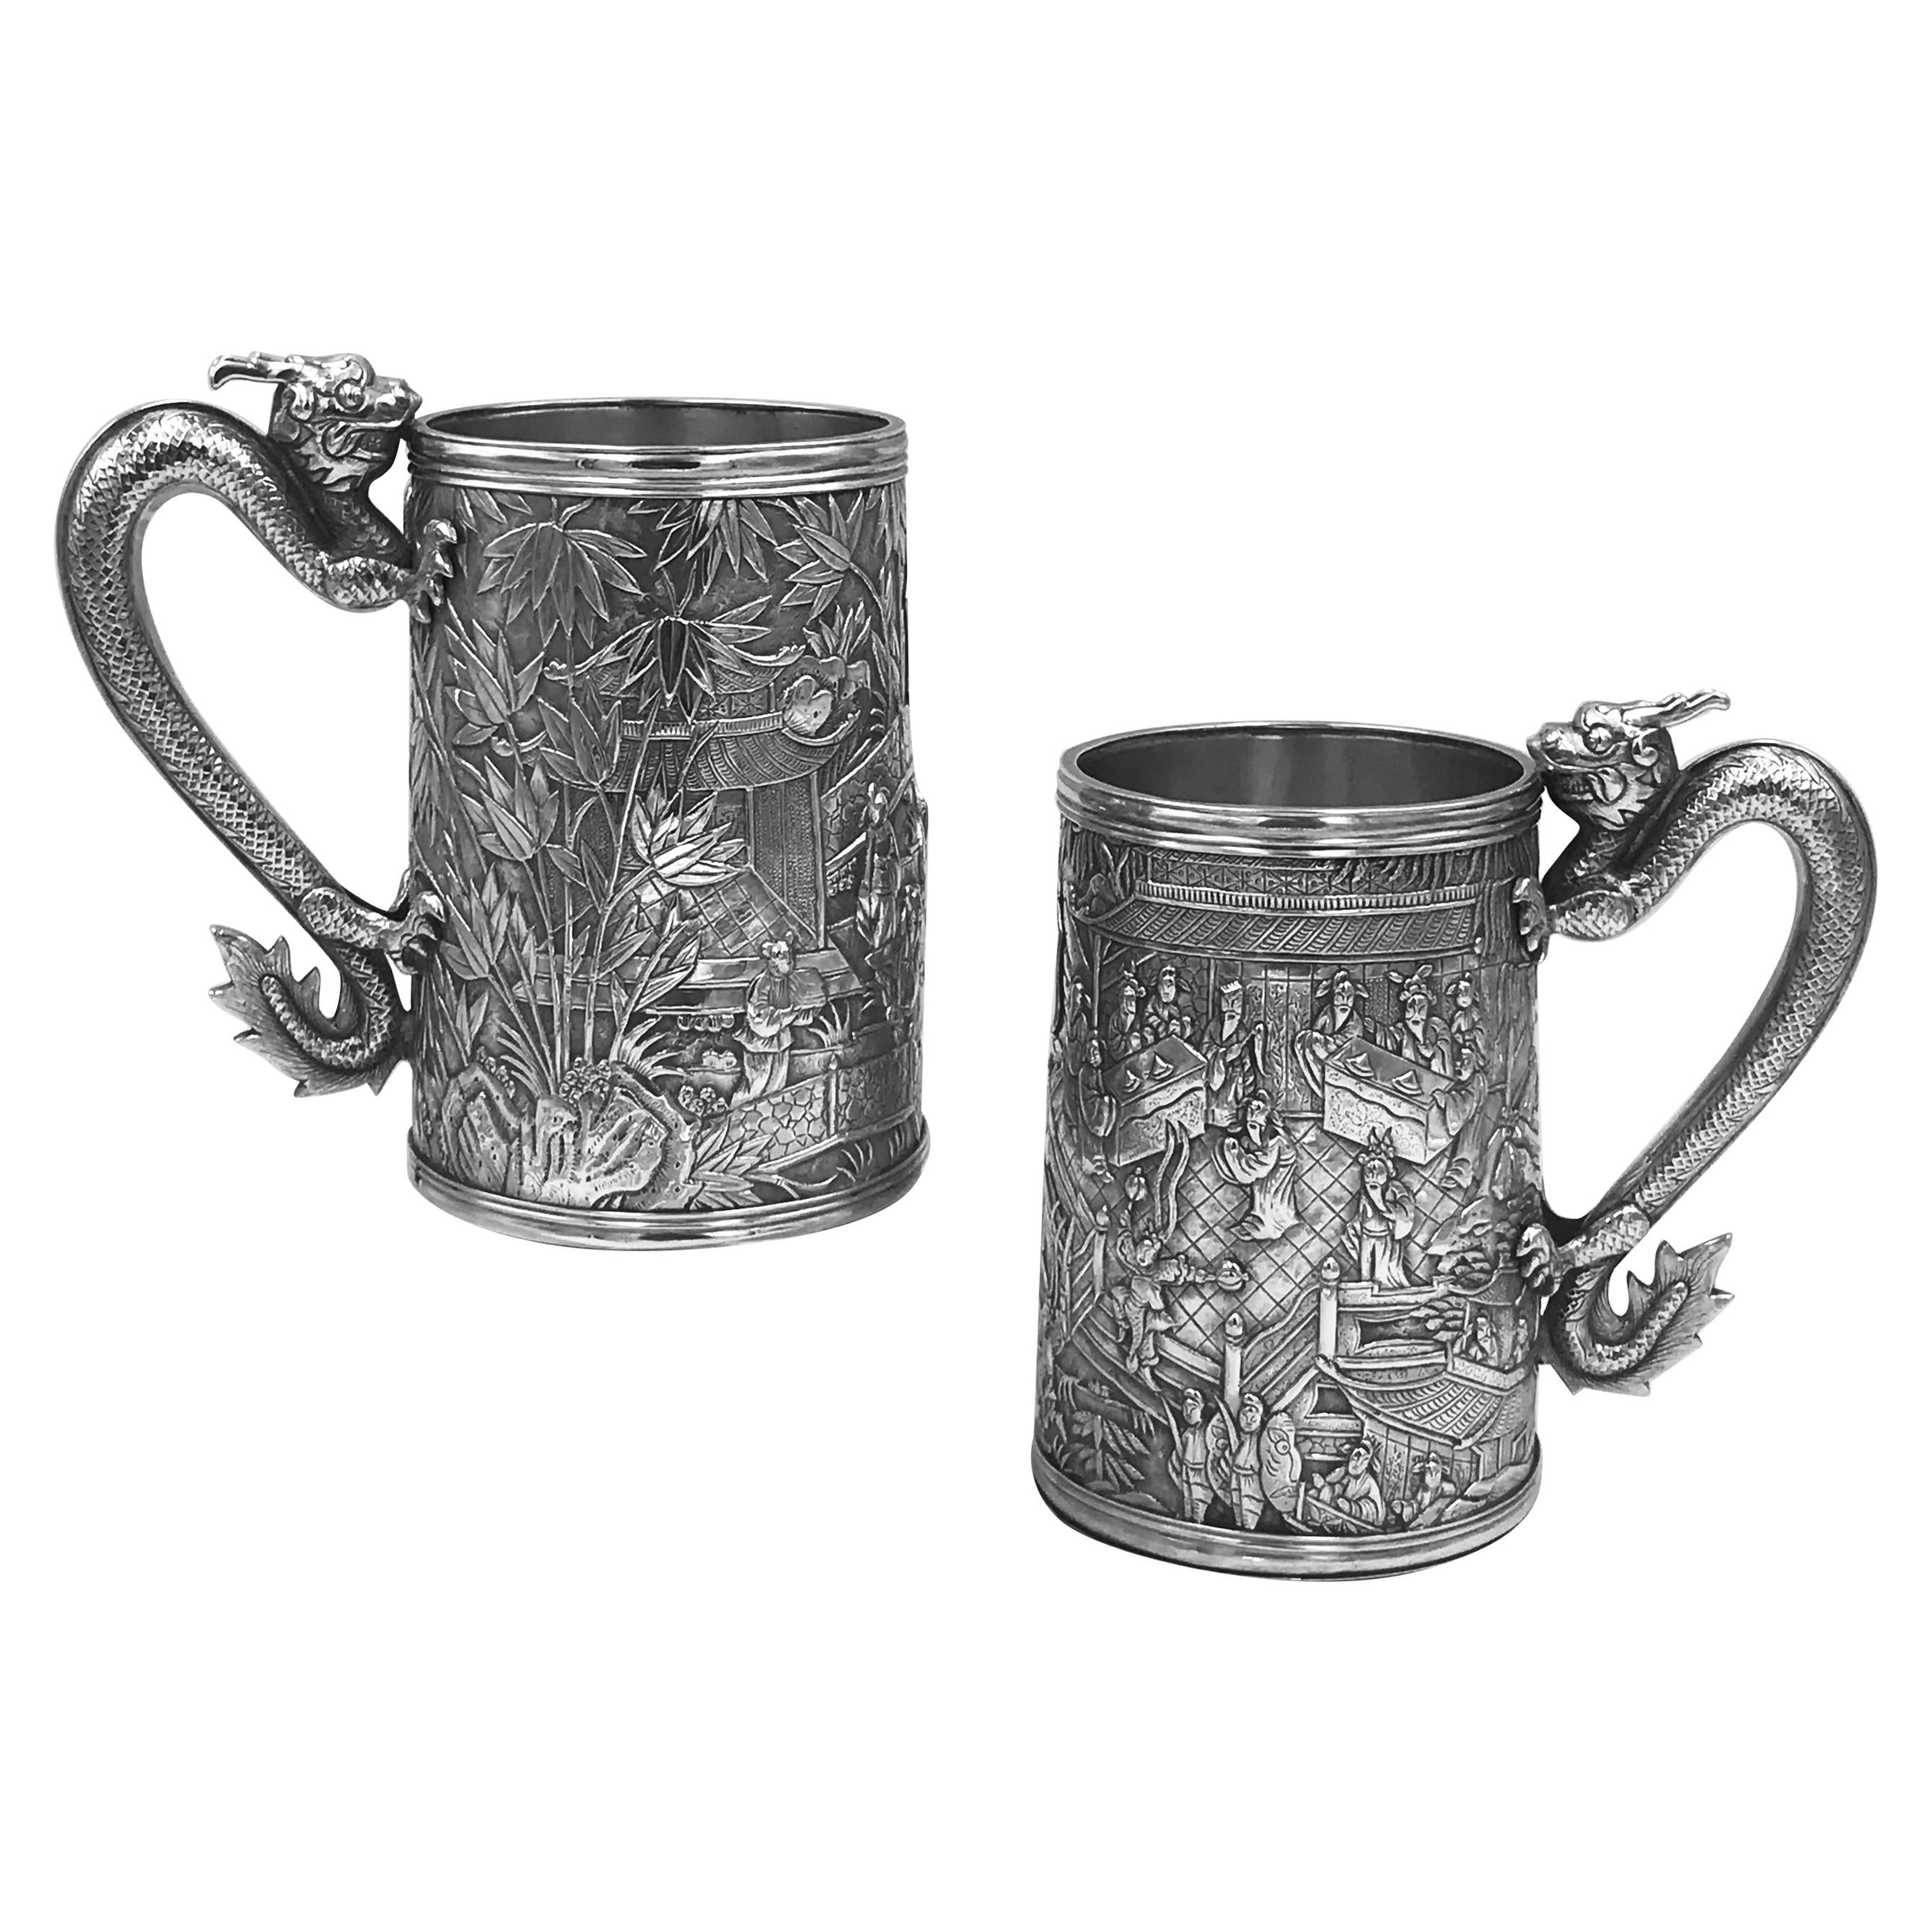 A rare pair of Chinese export silver mugs/tankards, each with figural Court scenes, bamboo, and dragon handles. They have the mark for Hoaching of Canton, circa 1860, and the Chinese character mark of the maker, Yi Chang.